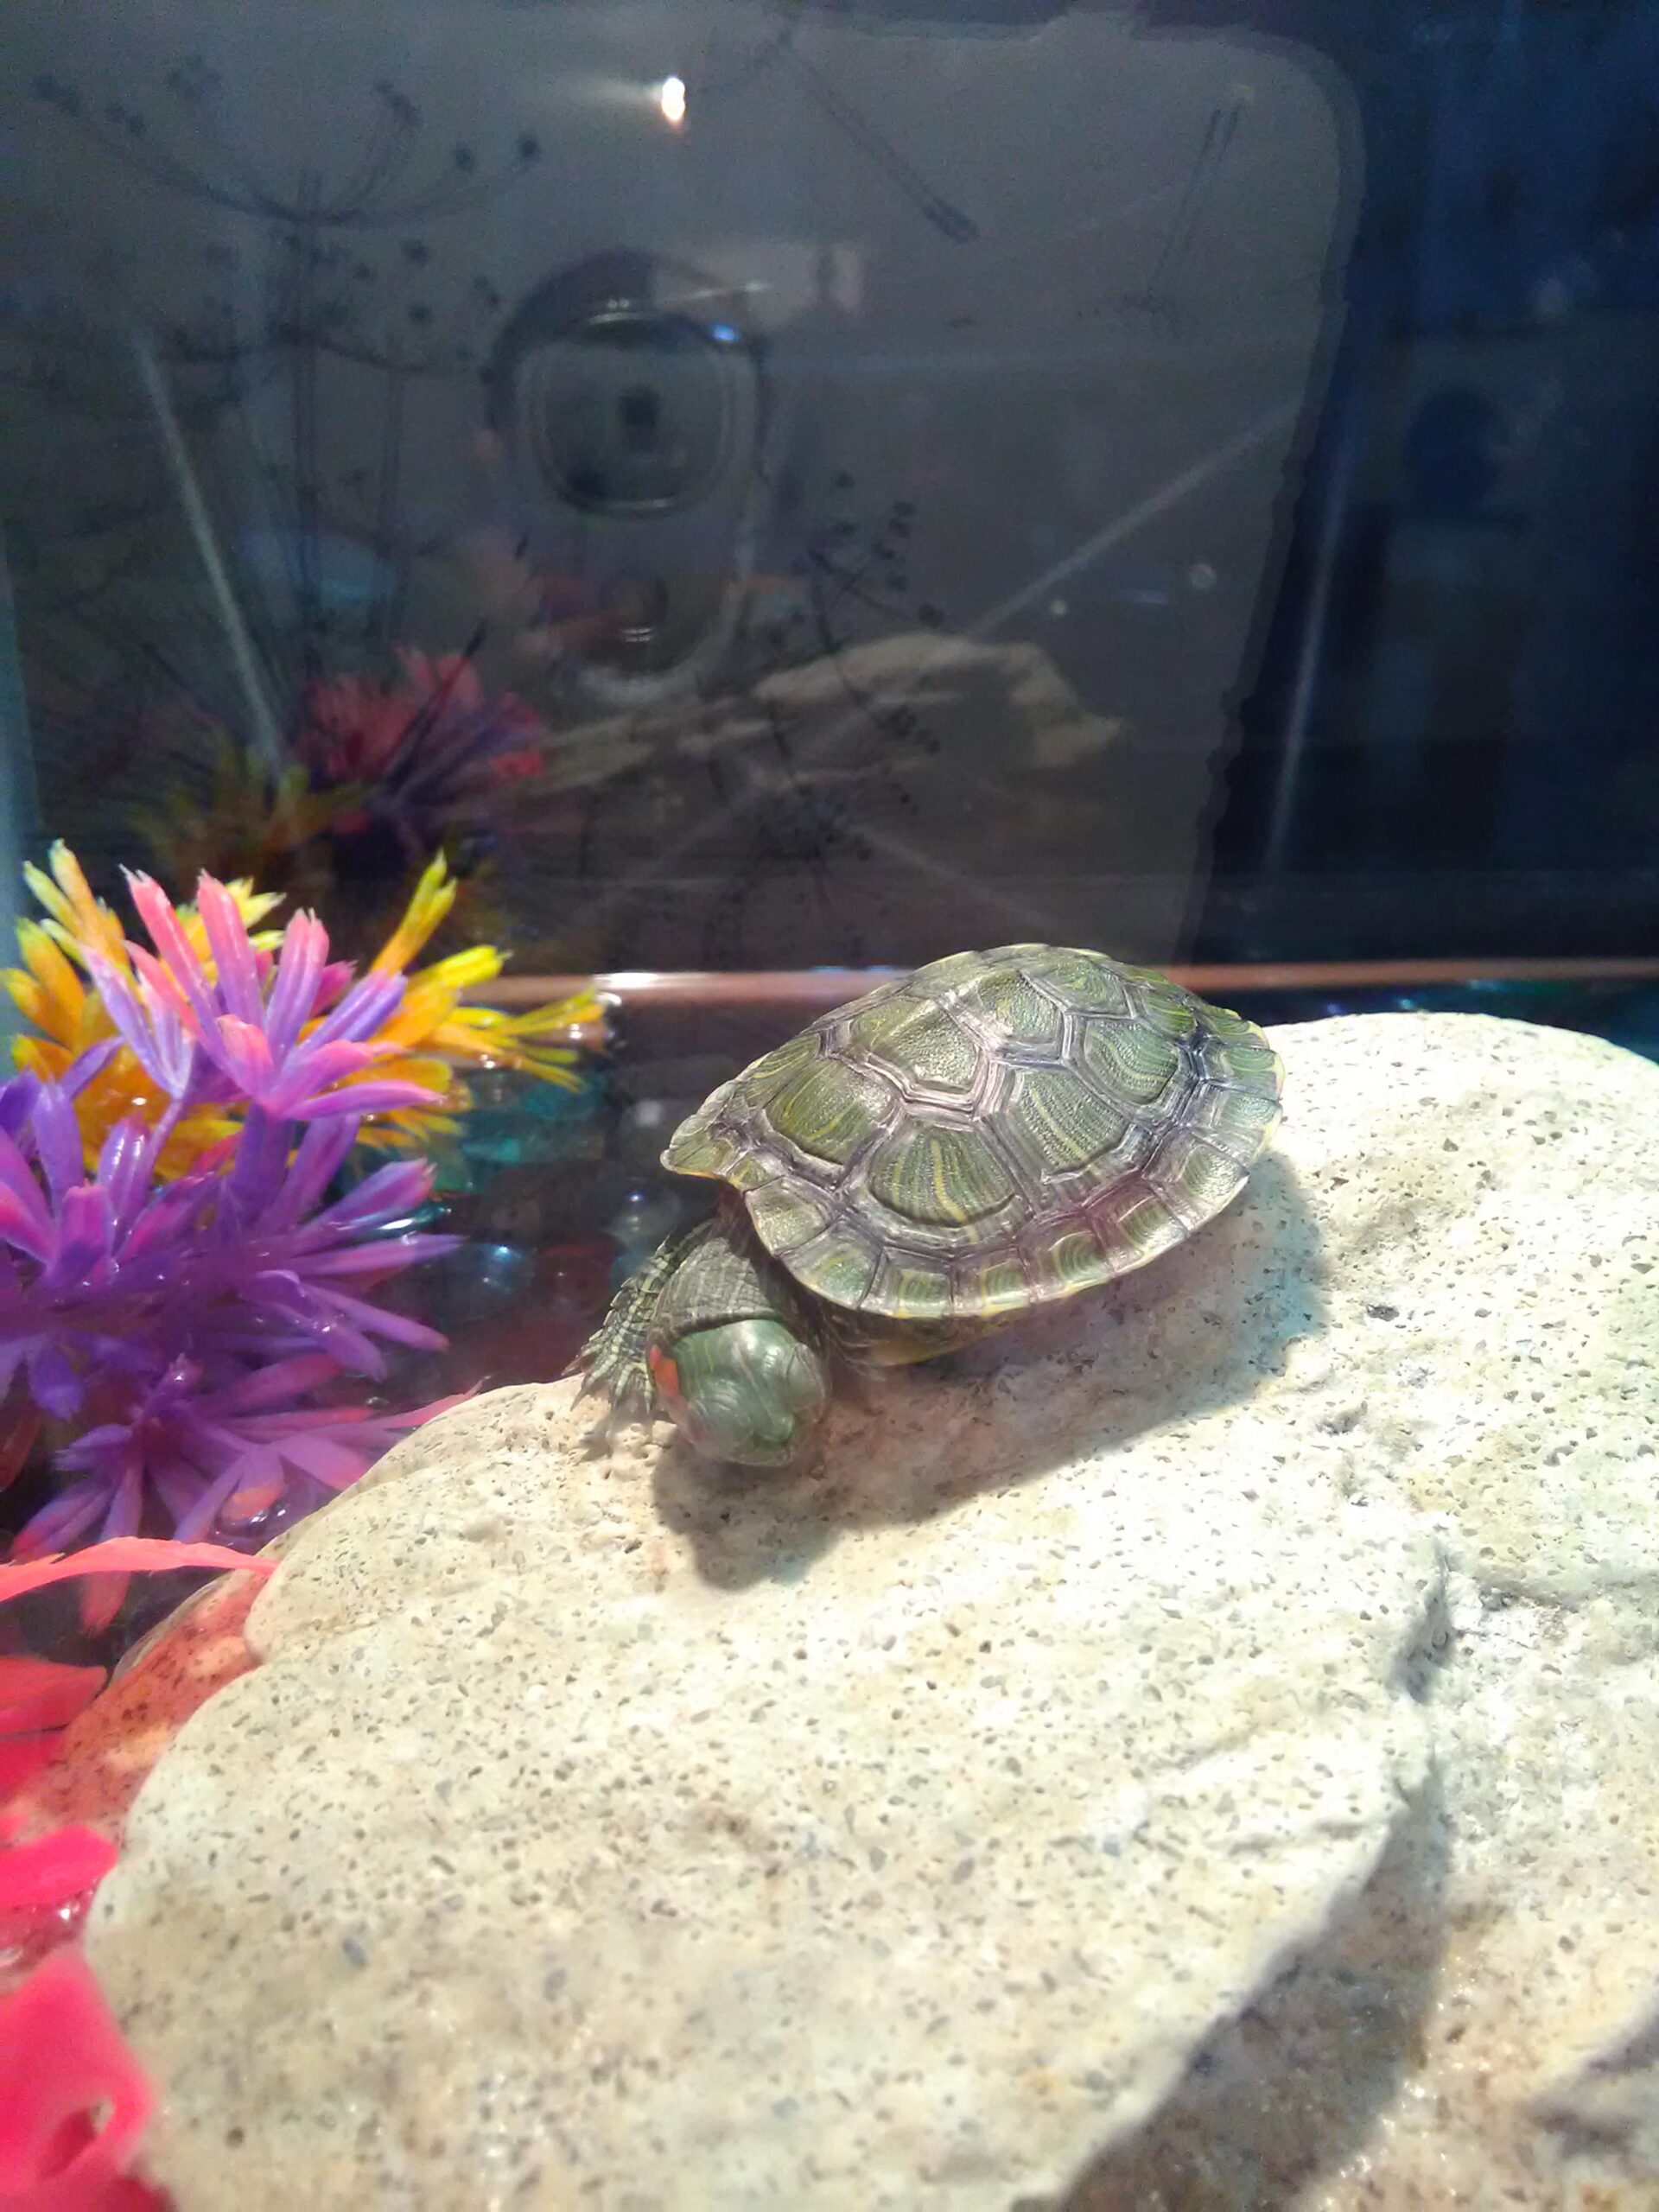 Why is My Turtle Sleeping So Much?